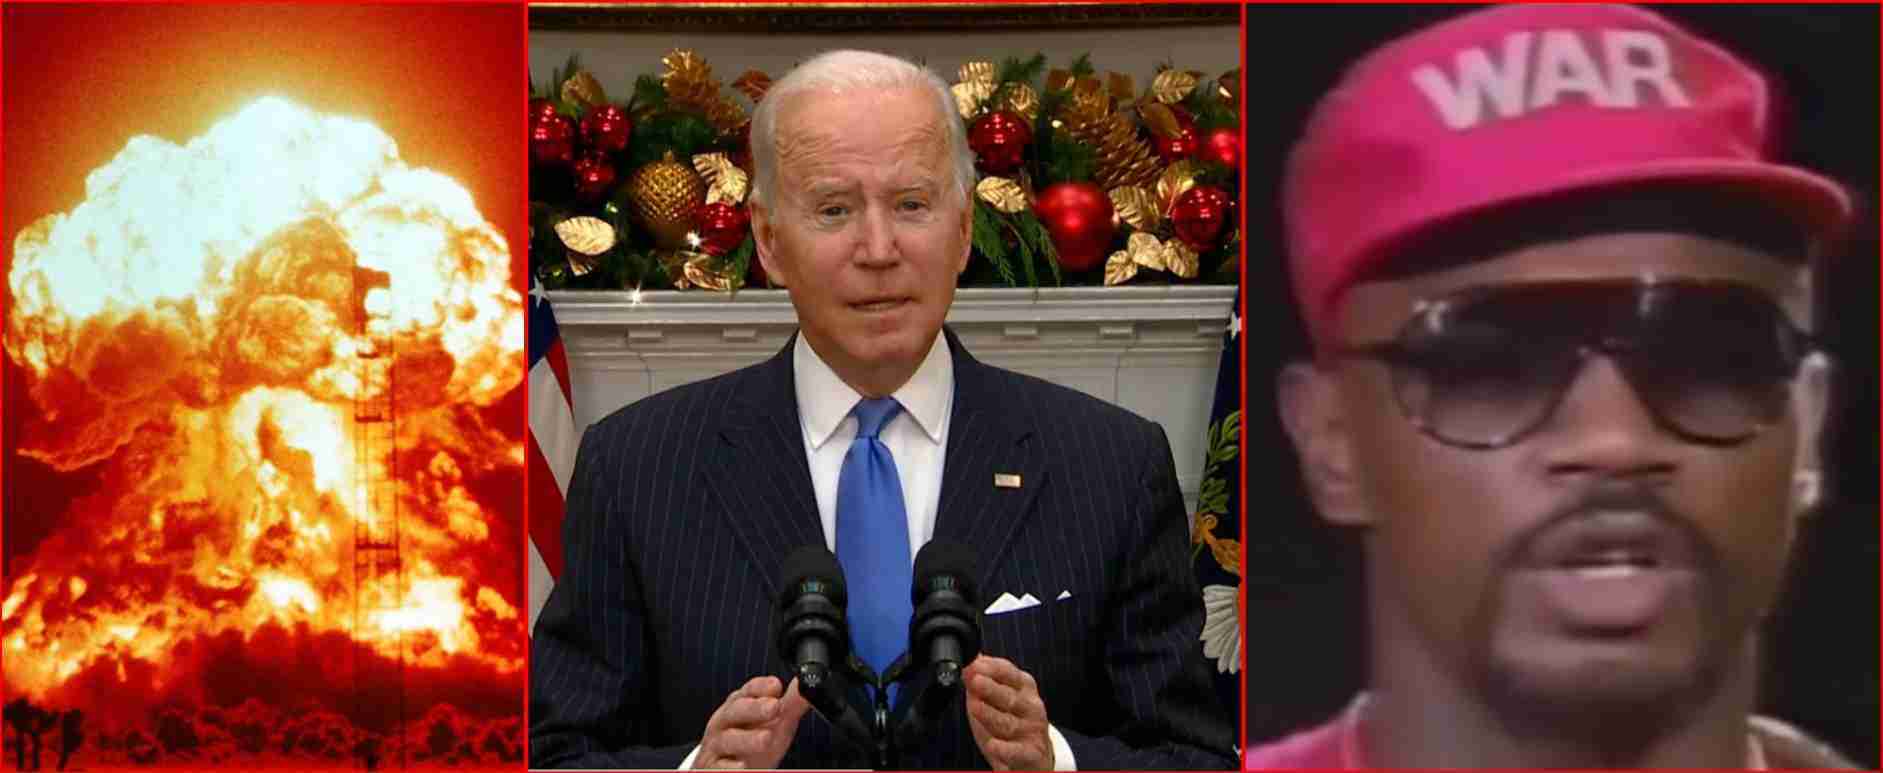 Biden To Avoid Fight Russia and China Fight Could Learn From Boxing